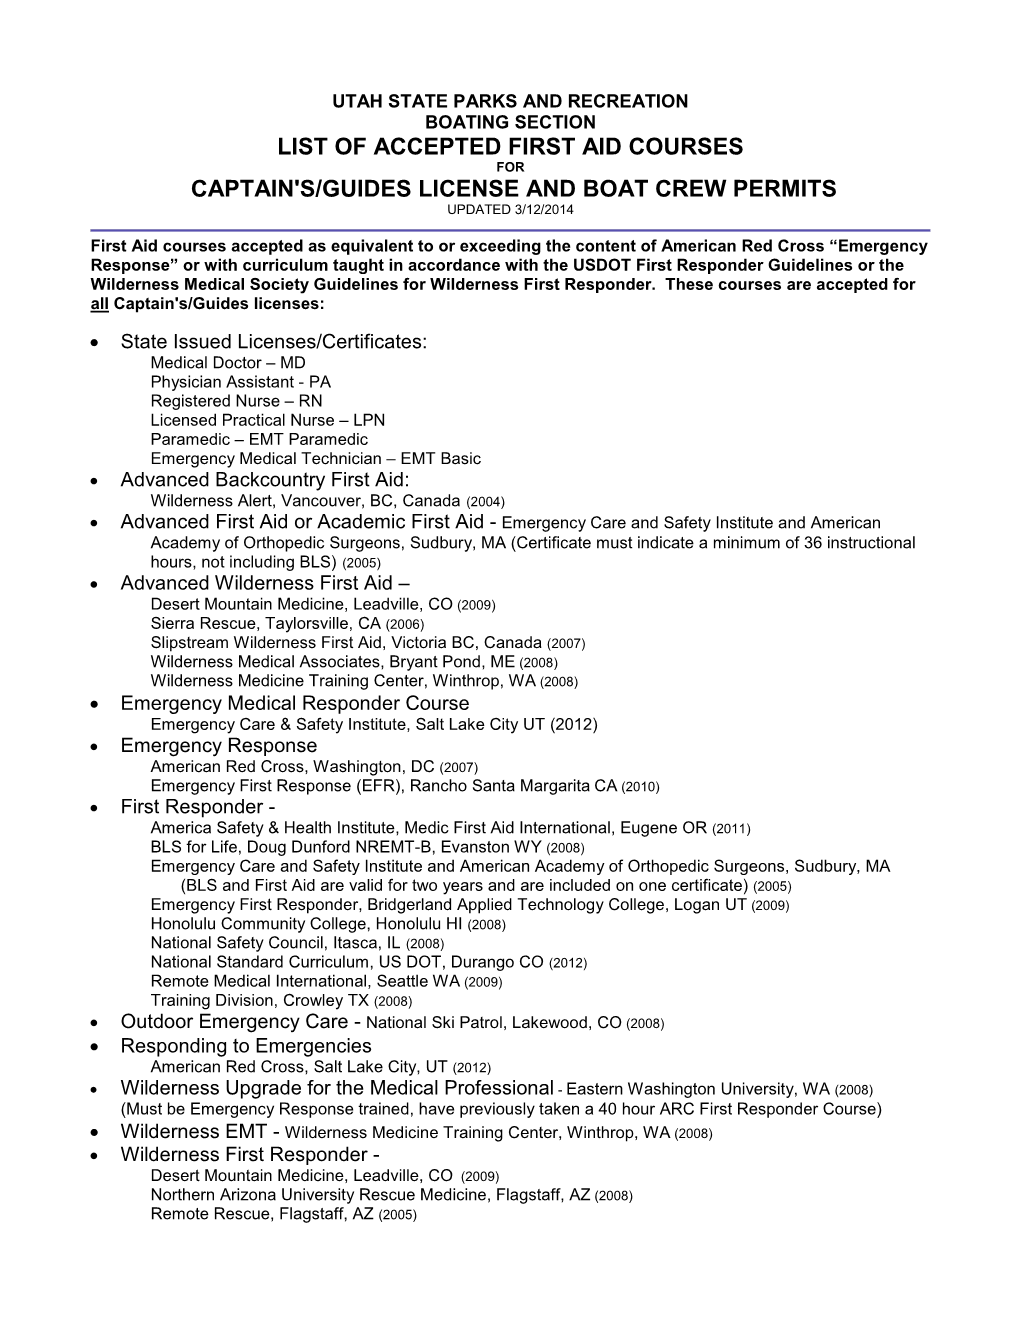 Utah State Parks and Recreation Boating Section List of Accepted First Aid Courses for Captain's/Guides License and Boat Crew Permits Updated 3/12/2014